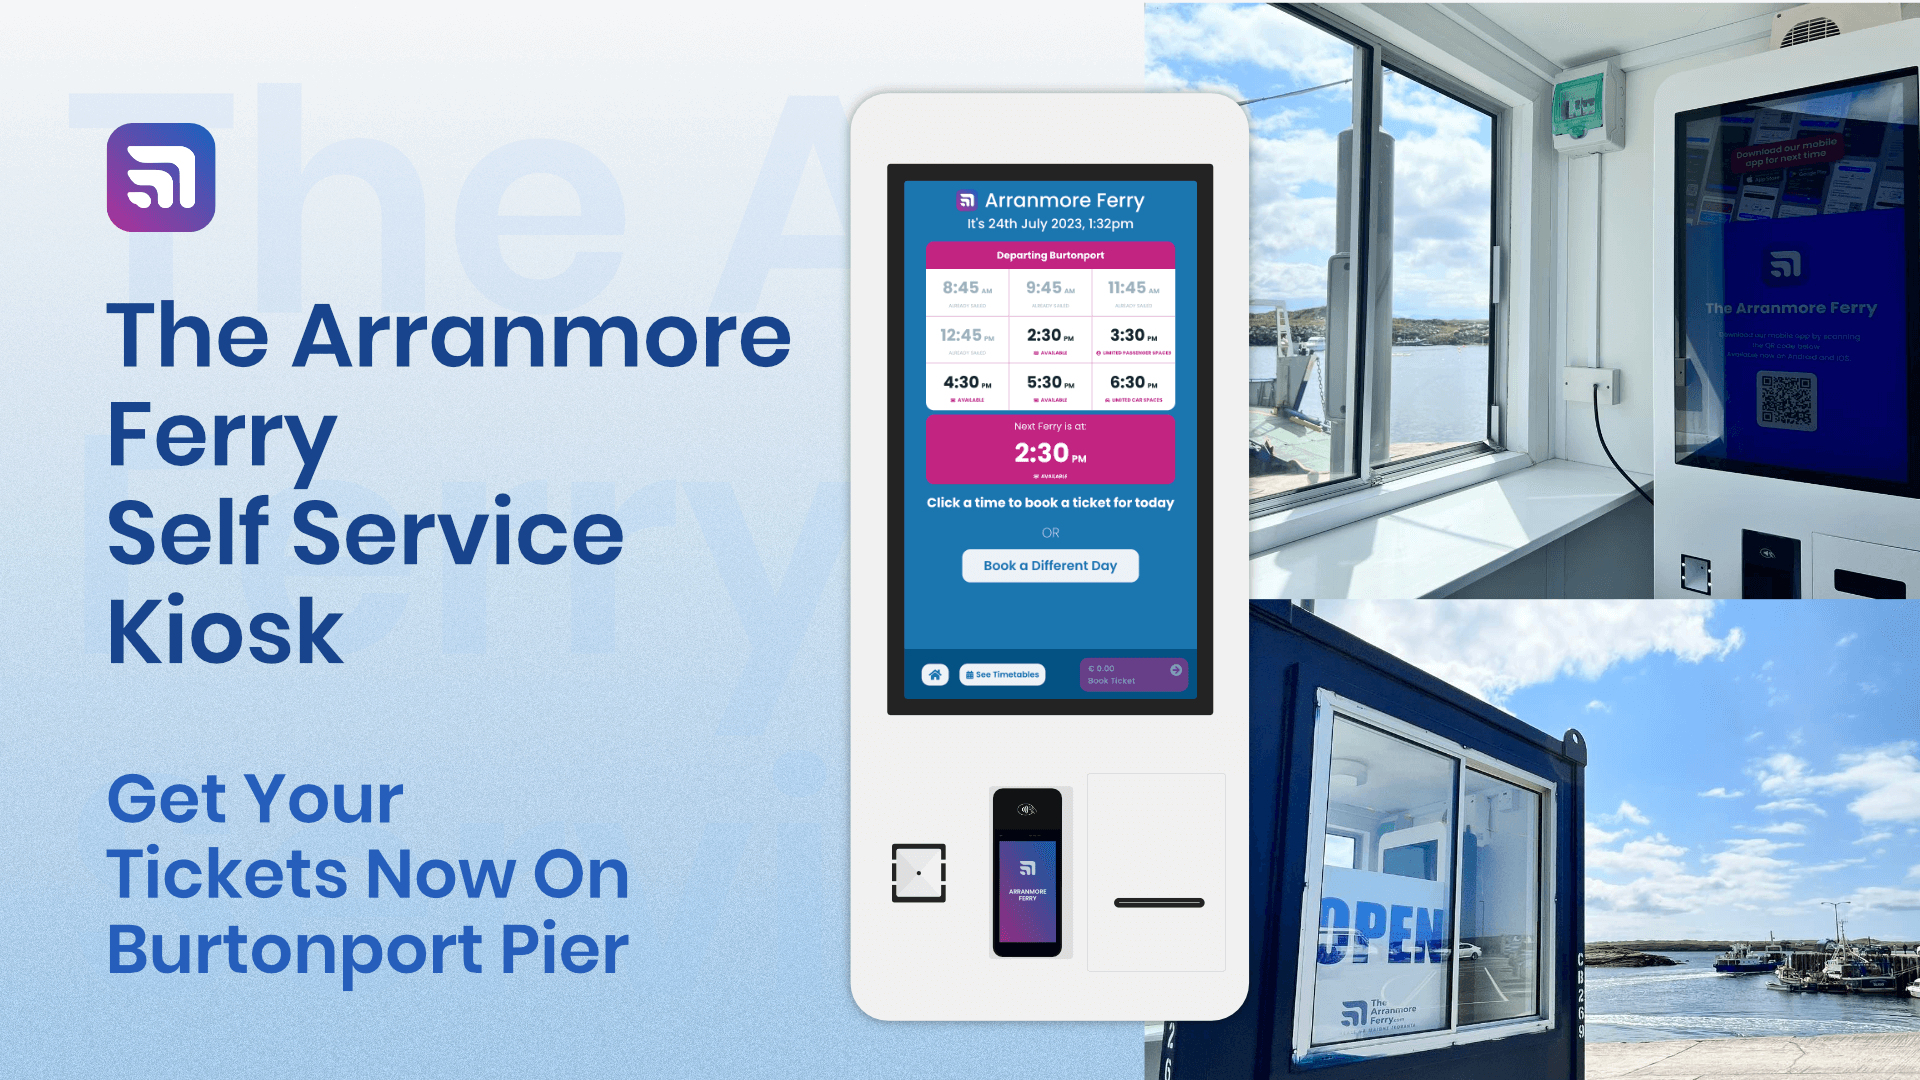 The Arranmore Ferry Kiosk is located on Burtonport Pier and is open now